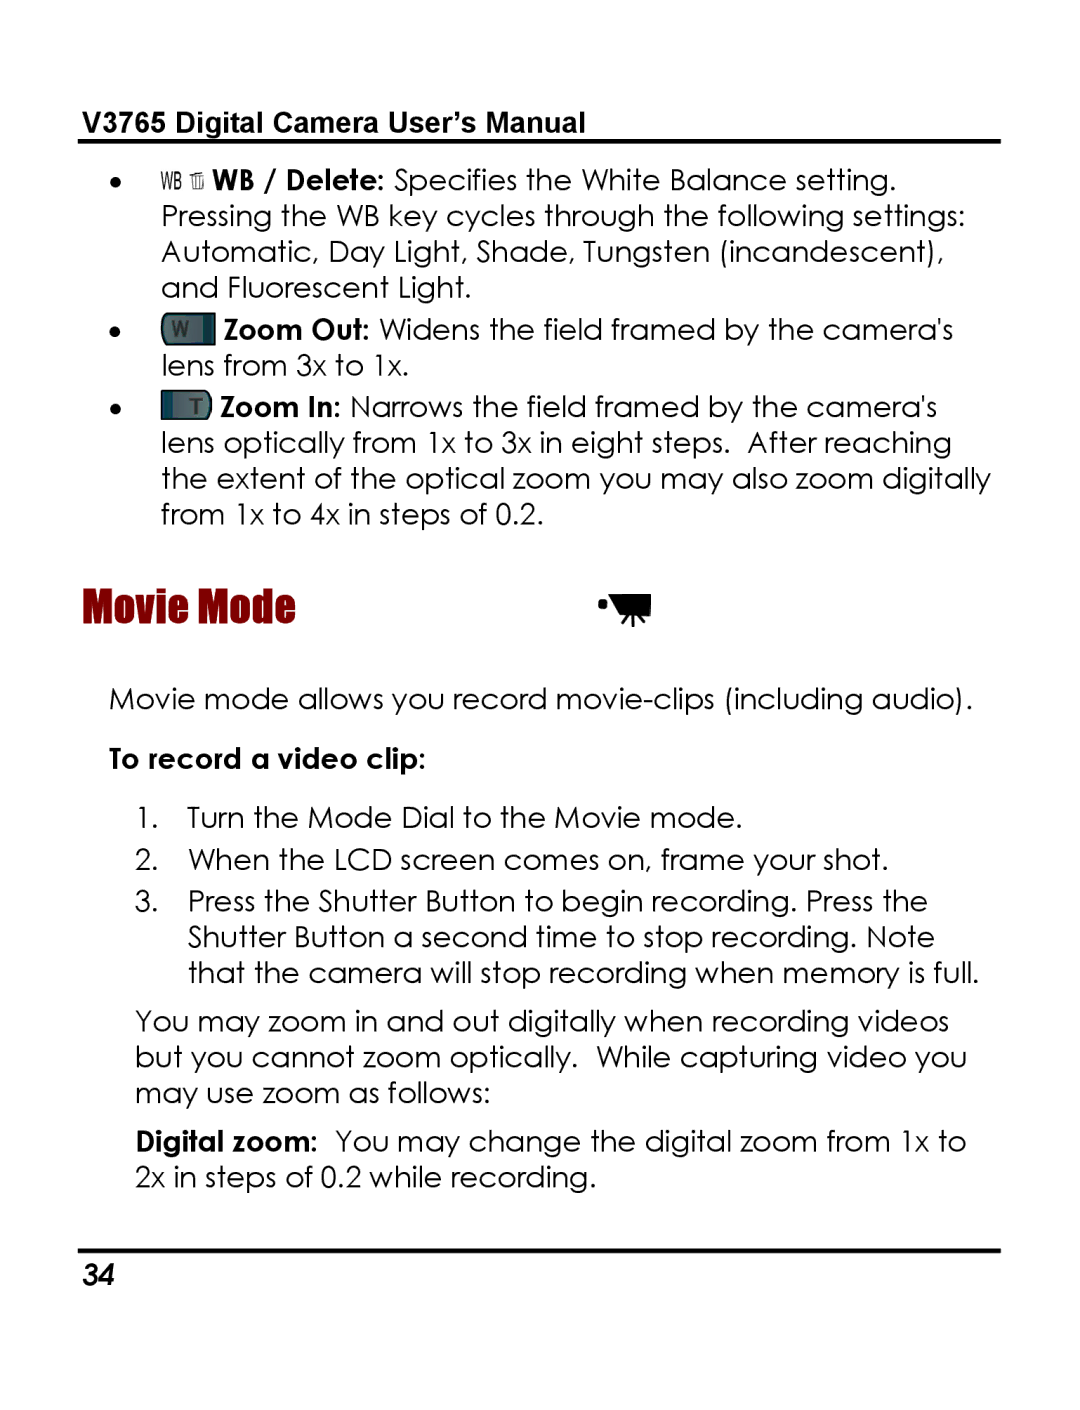 Vivitar 3765 instruction manual Movie Mode, To record a video clip 